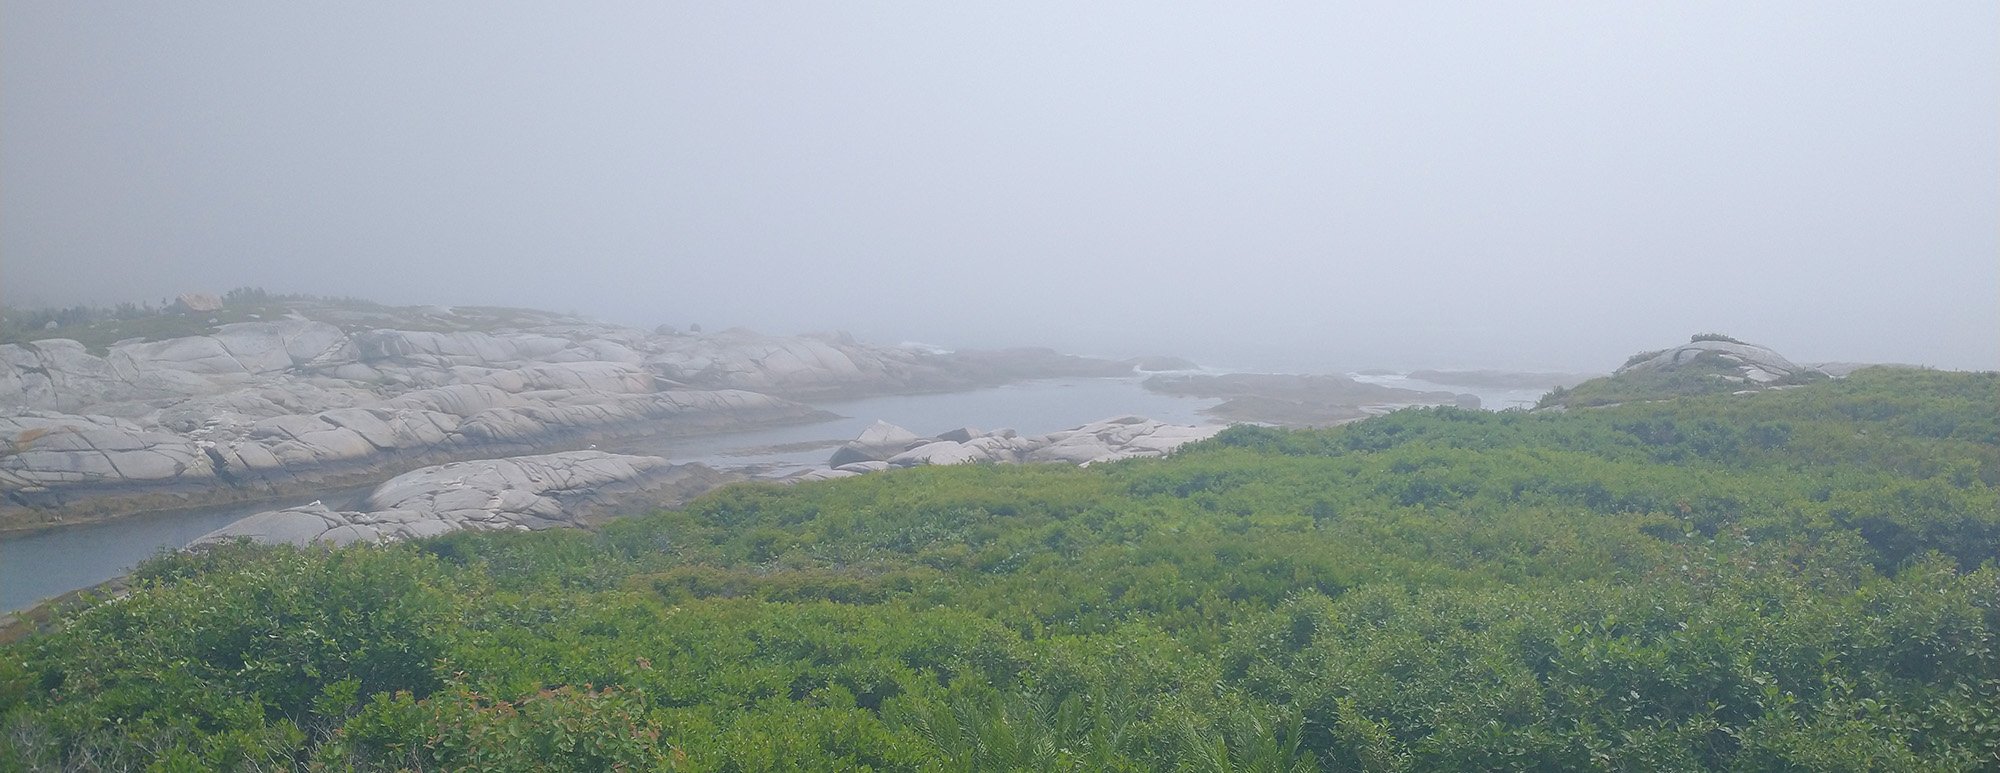 The entire Peggy's Cove area and town was shrouded in this thick fog. Gave me a nice break from the heat.